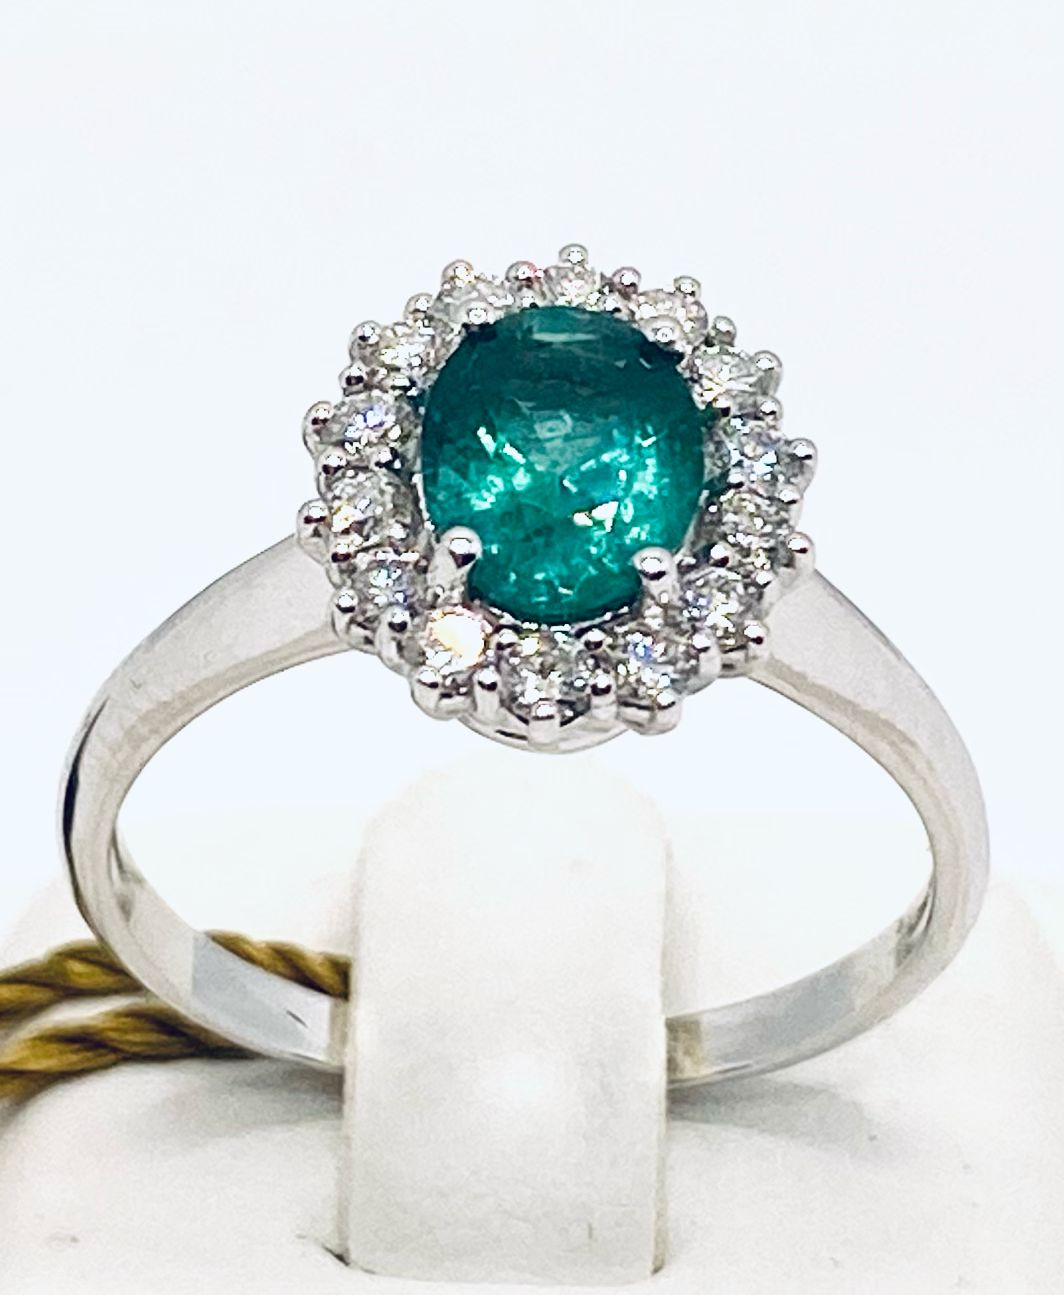 Emerald gold and diamond ring item code AN1516